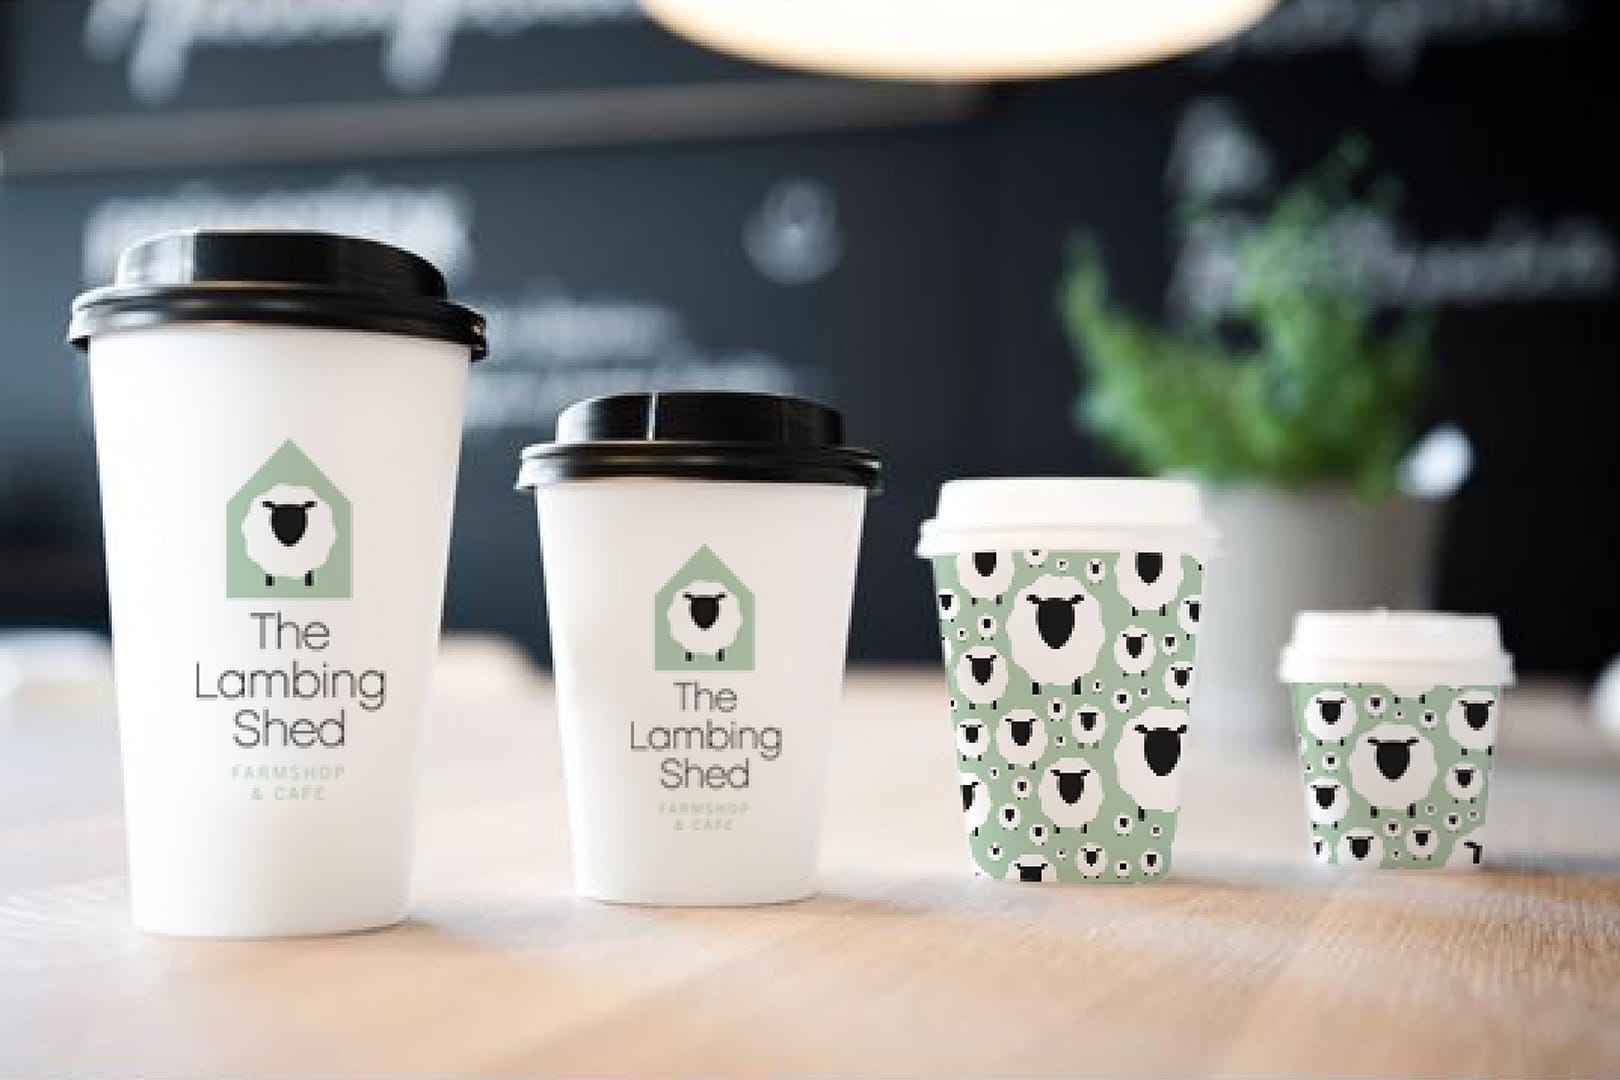 Coffee Cup Designs fro the Lambing Shed Knutsford